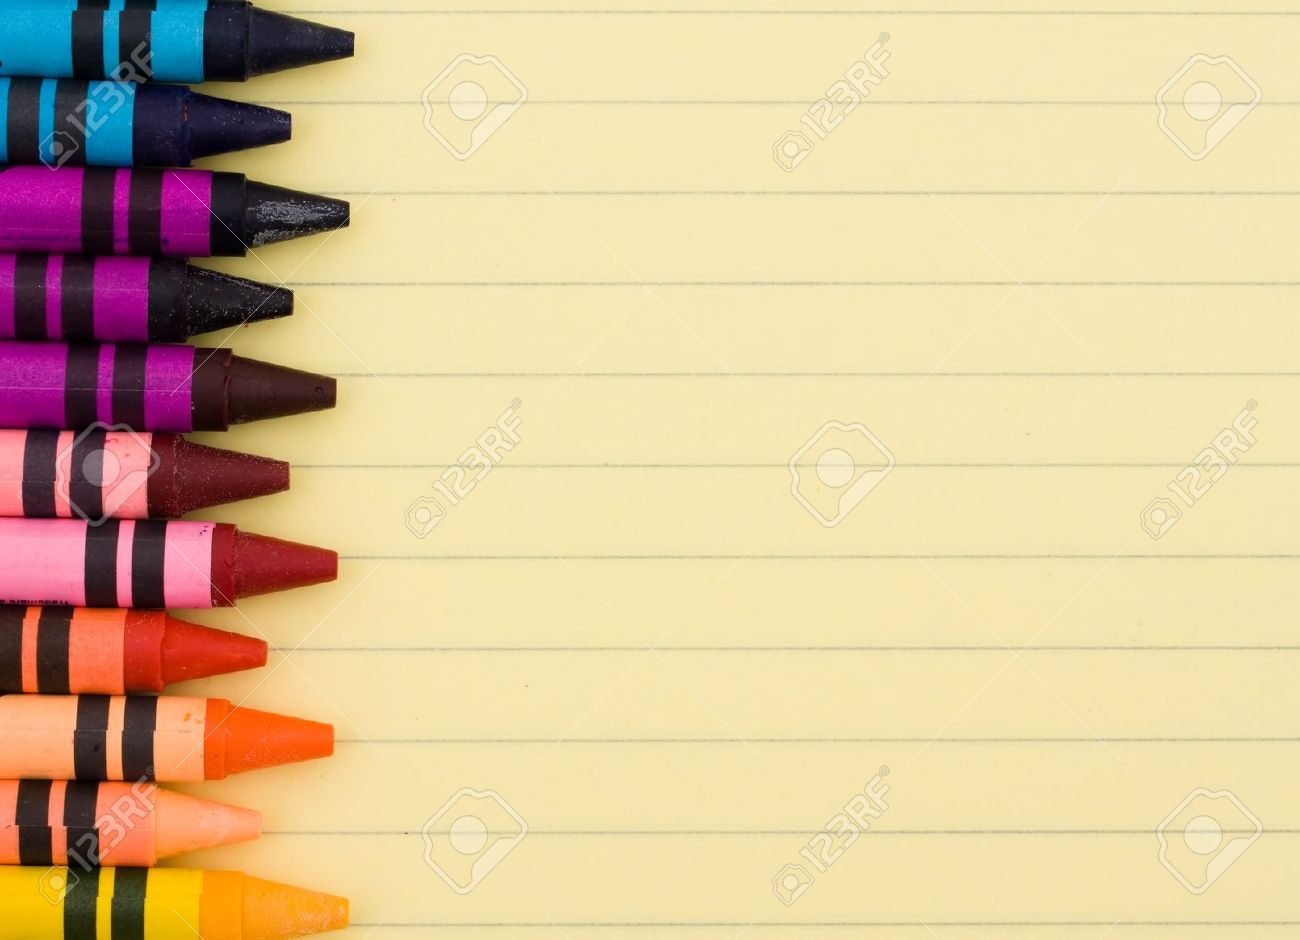 Colorful Crayons On A Sheet Of Lined Paper Education Background